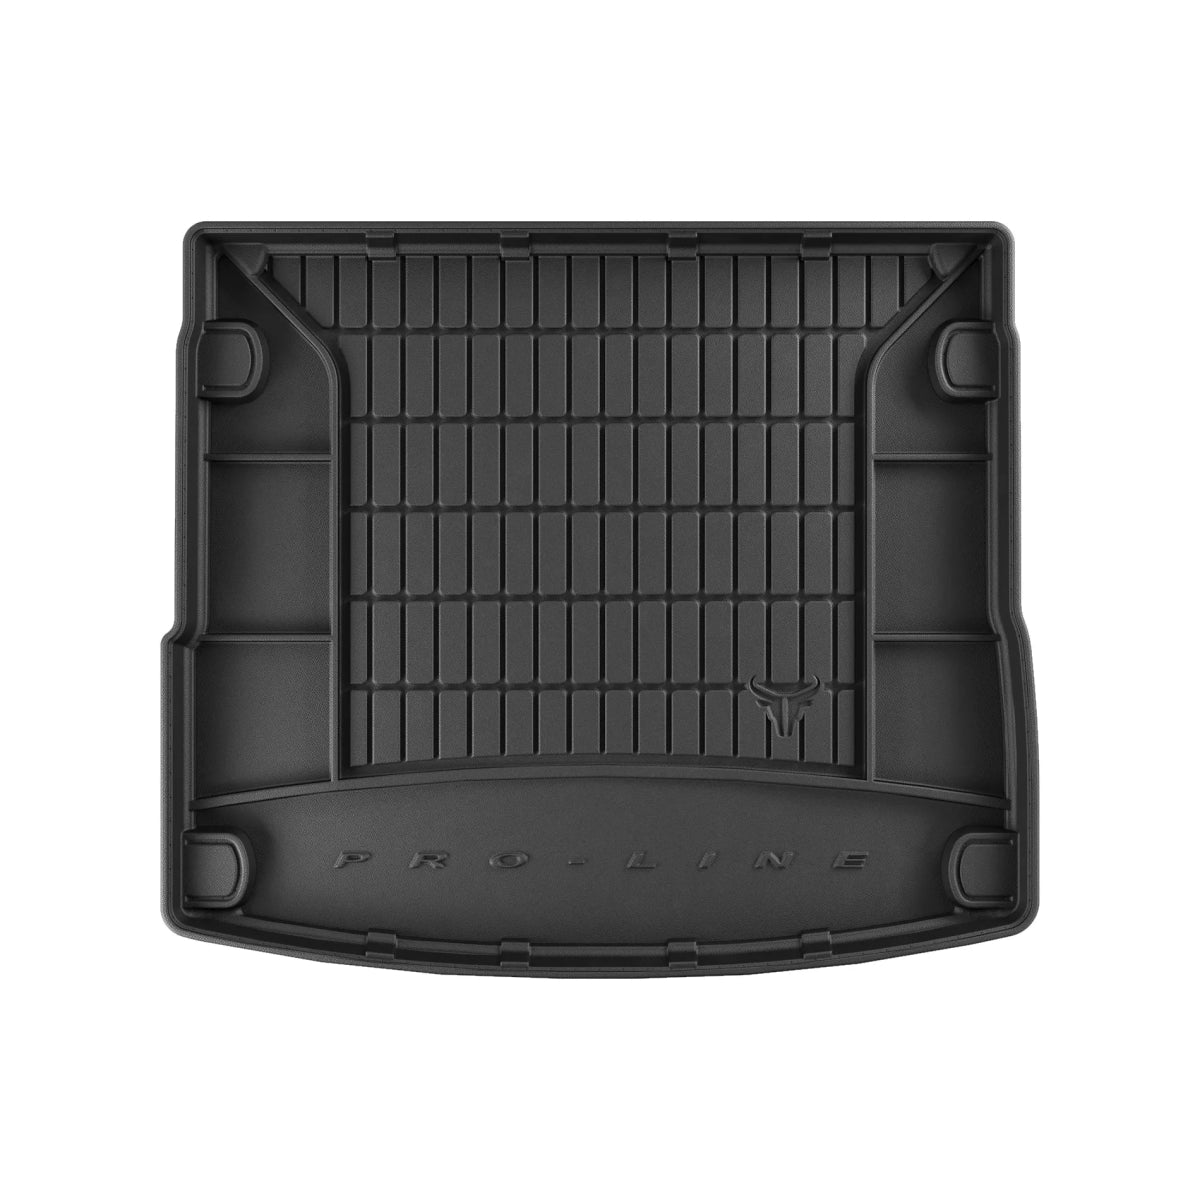 Tailored Car Boot Liner for Audi - Protect Your Boot from Dirt and Damage - Green Flag Shop